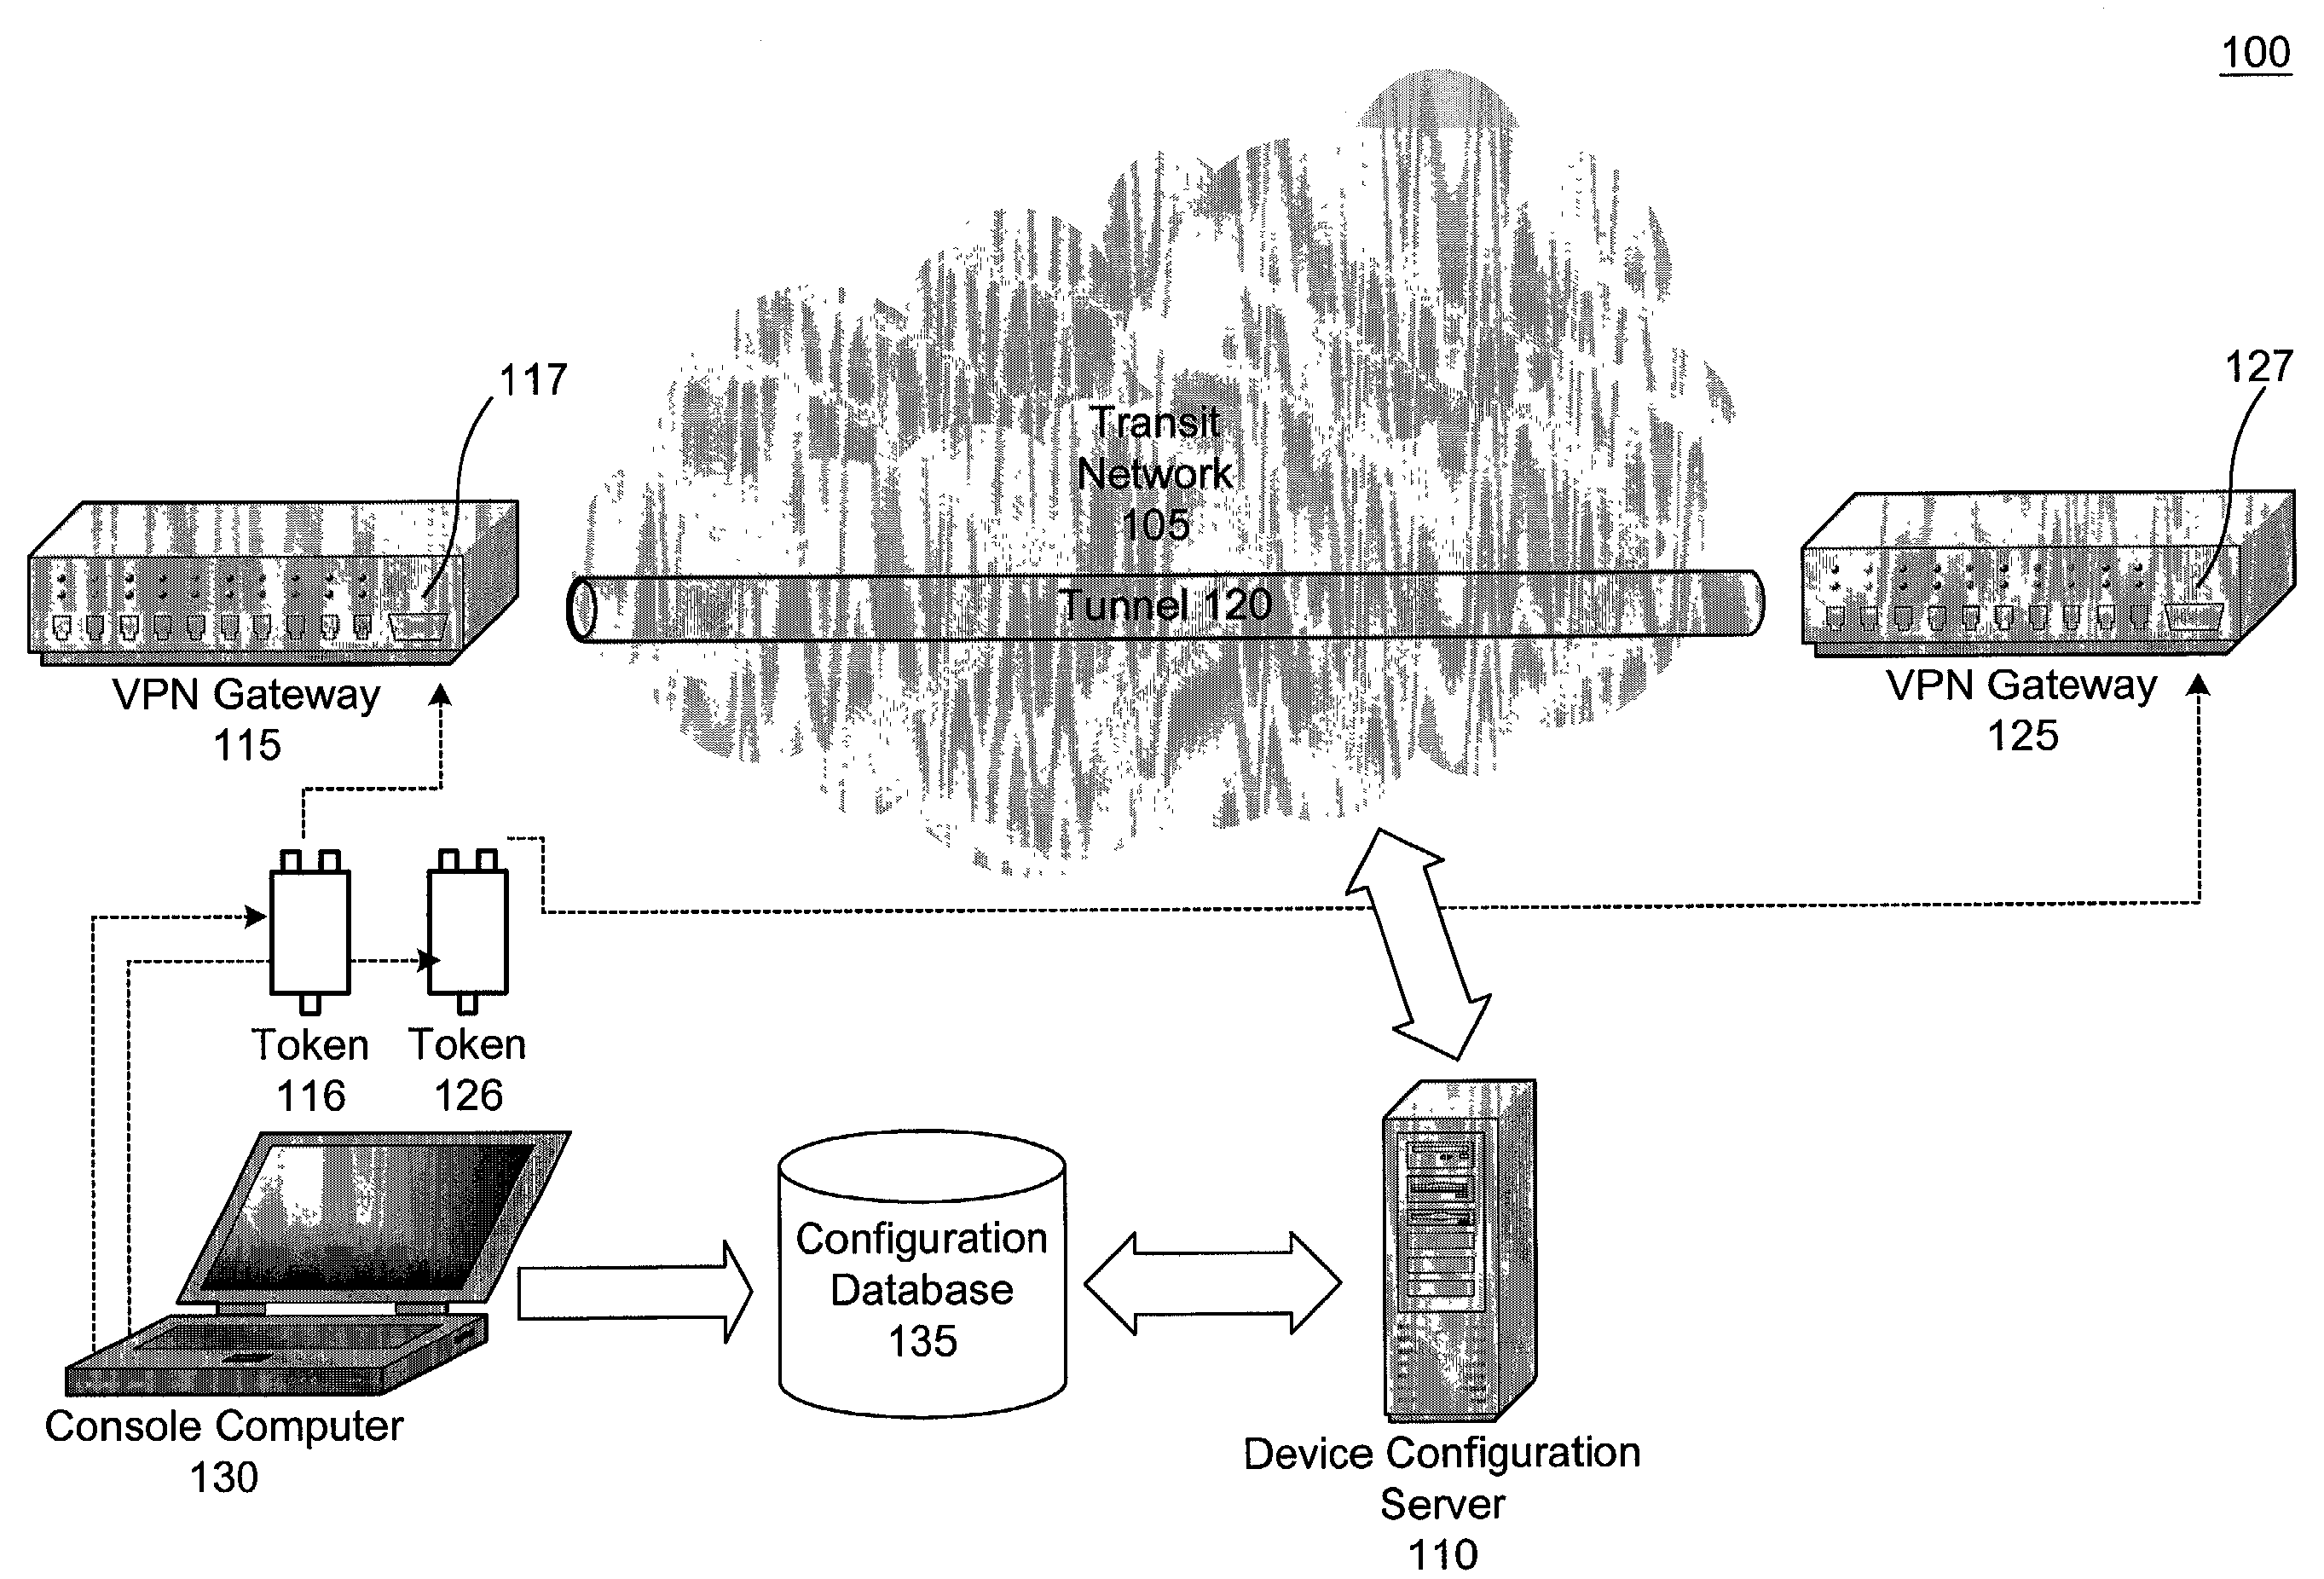 Automated establishment of addressability of a network device for a target network environment